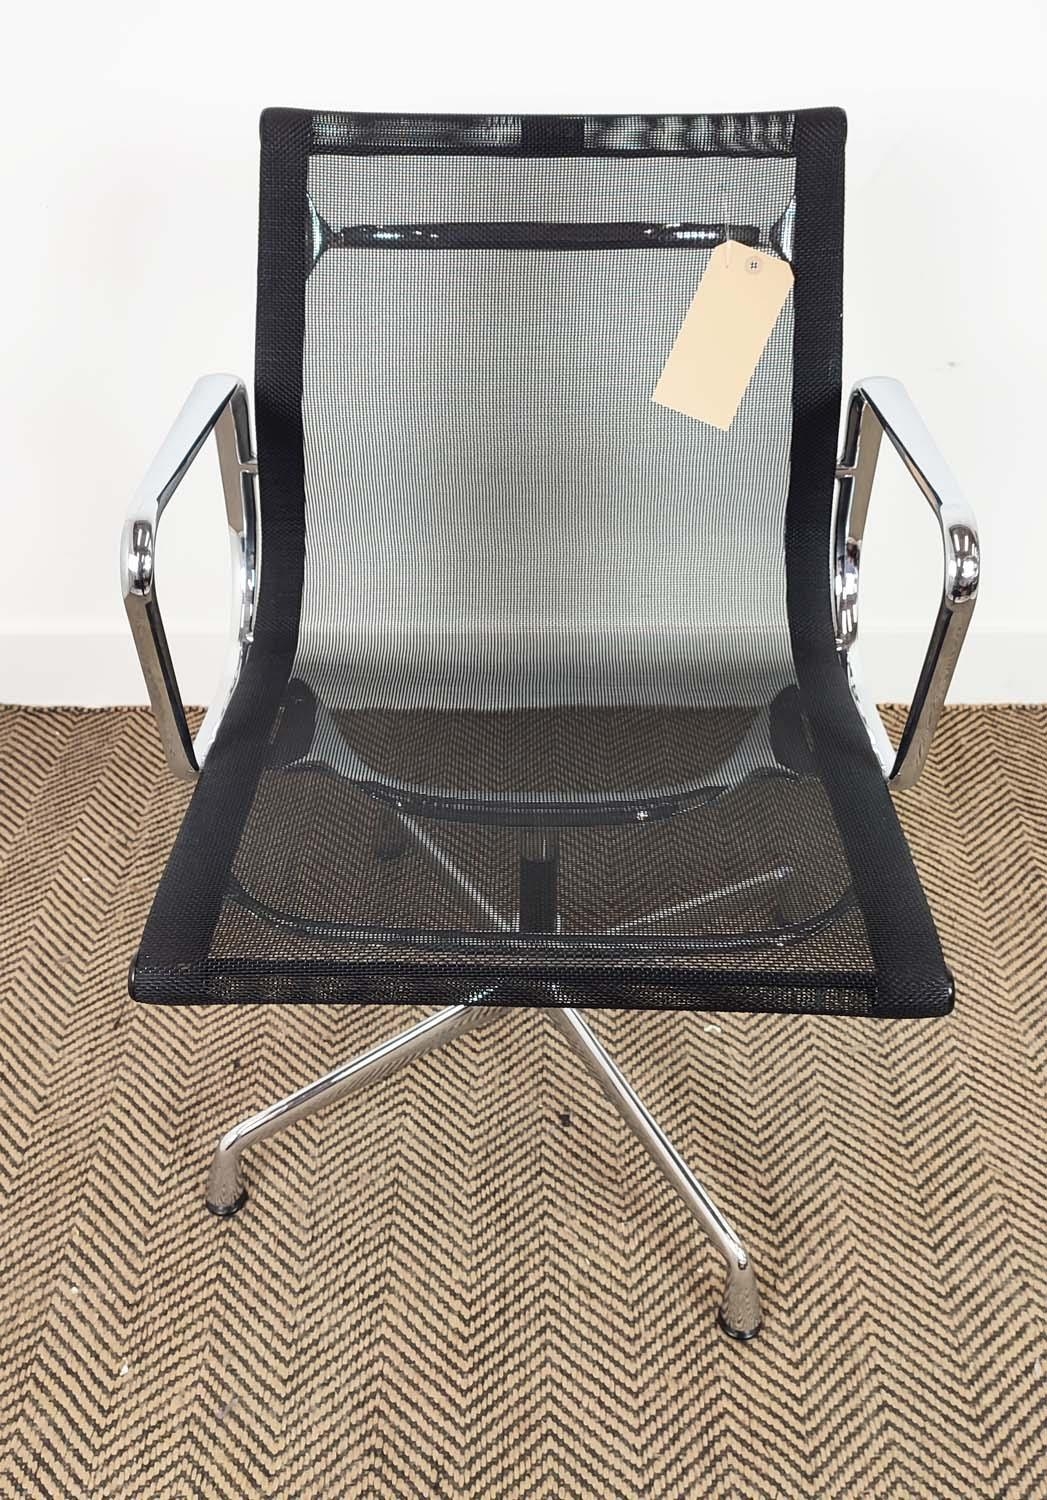 VITRA ALUMINIUM GROUP CHAIR, designed by Charles and Ray Eames, 57cm W x 85cm H, bears label. - Image 3 of 6